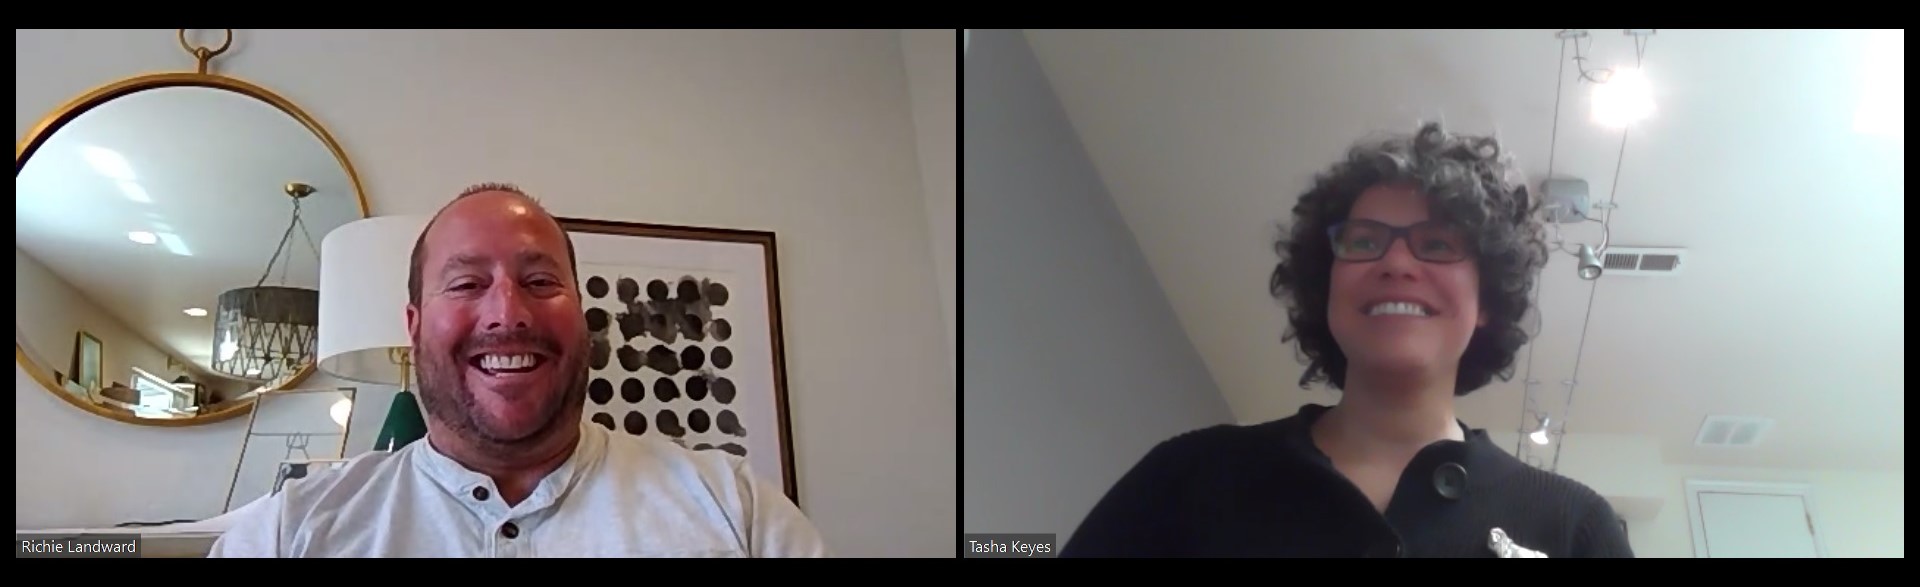 A screen shot of a video conference with College of Social Work professors Rich Landward and Tasha Seneca Keyes